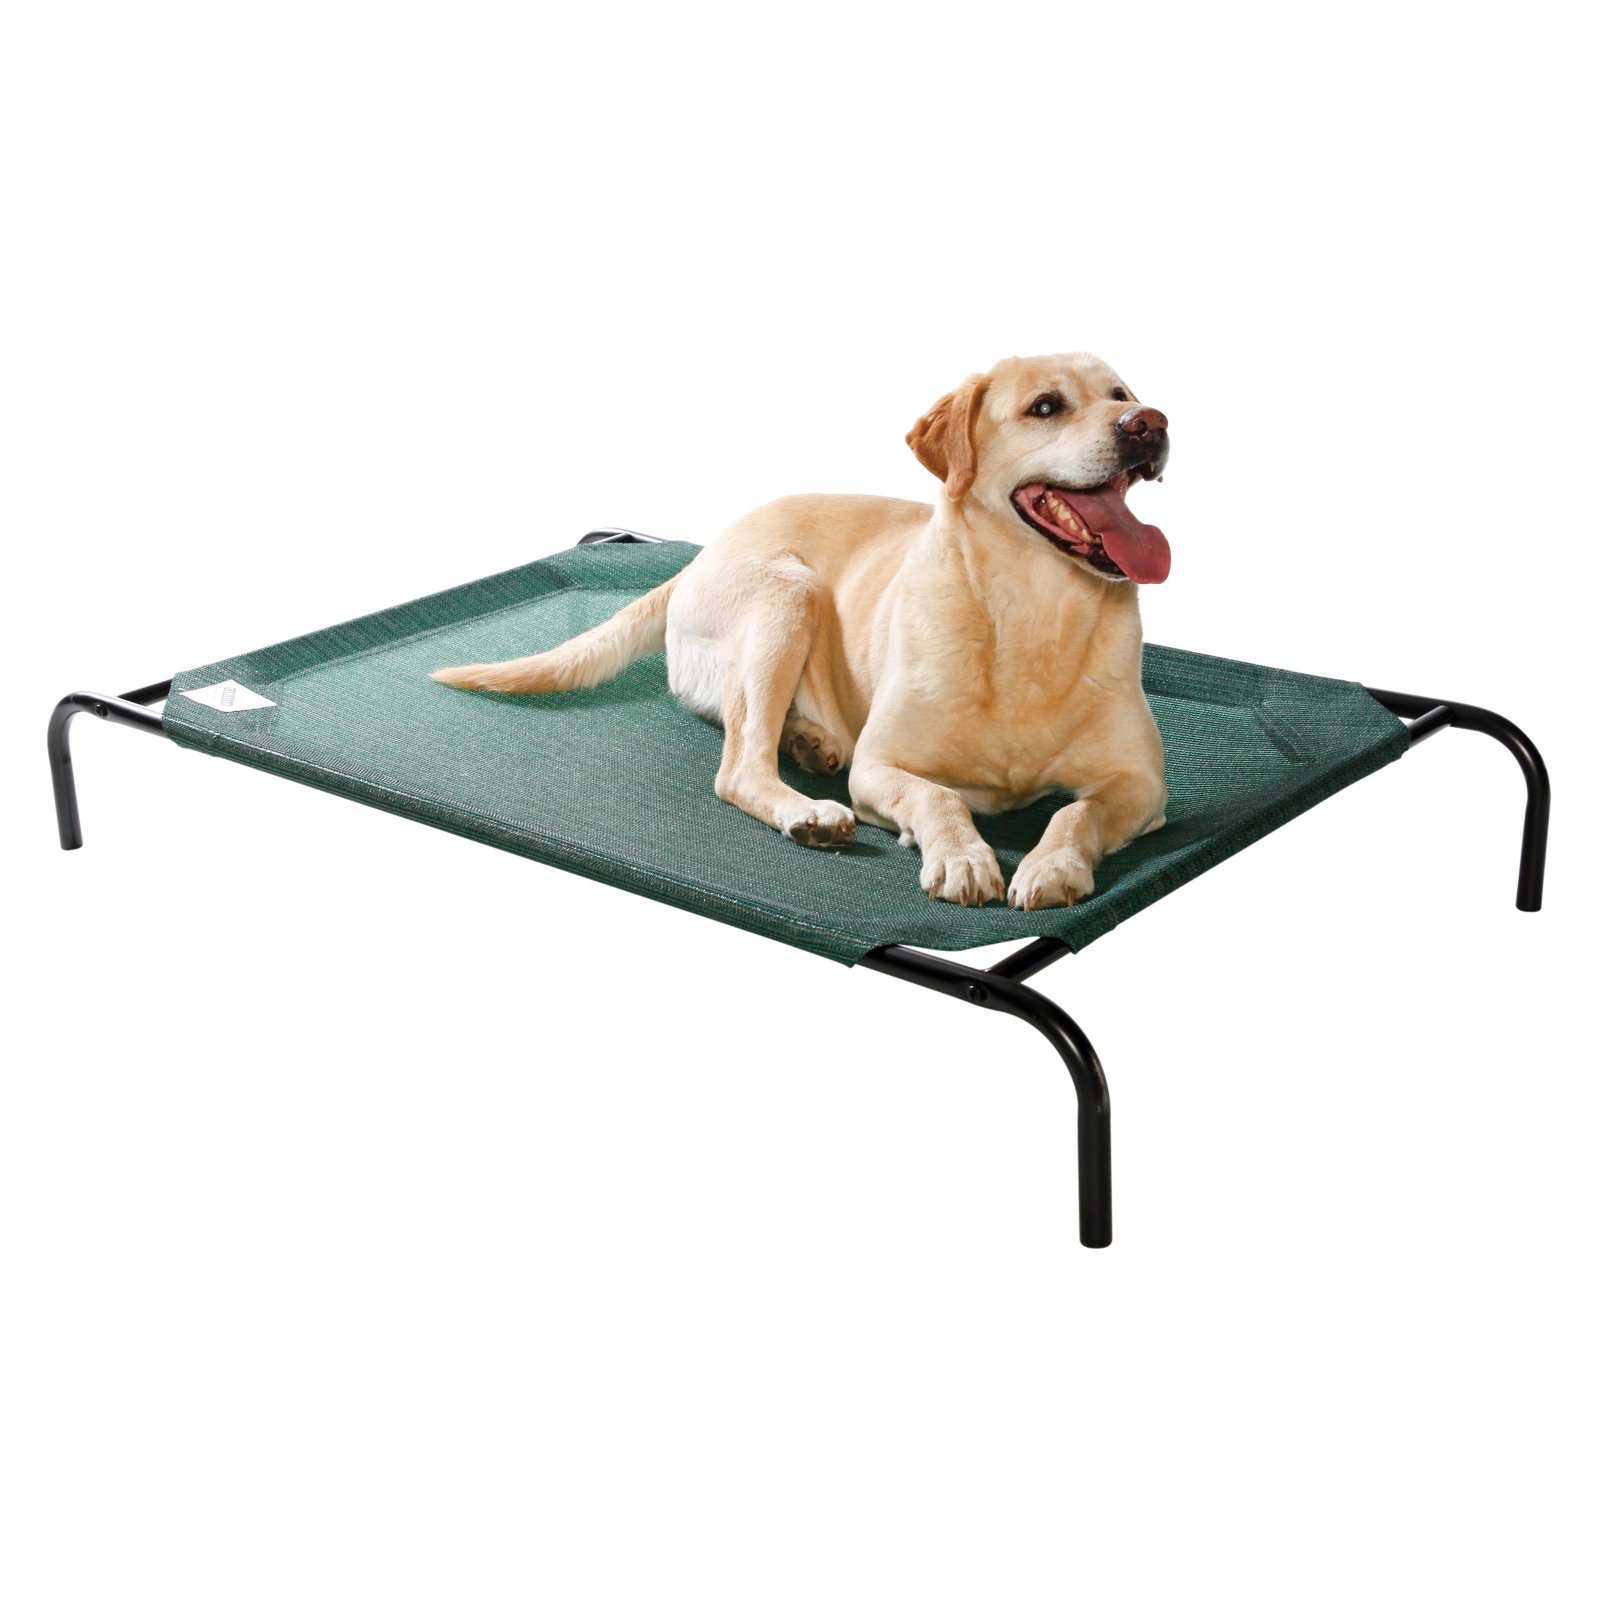 Coolaroo Elevated Pet Bed with Breathable Fabric, Large 51.1